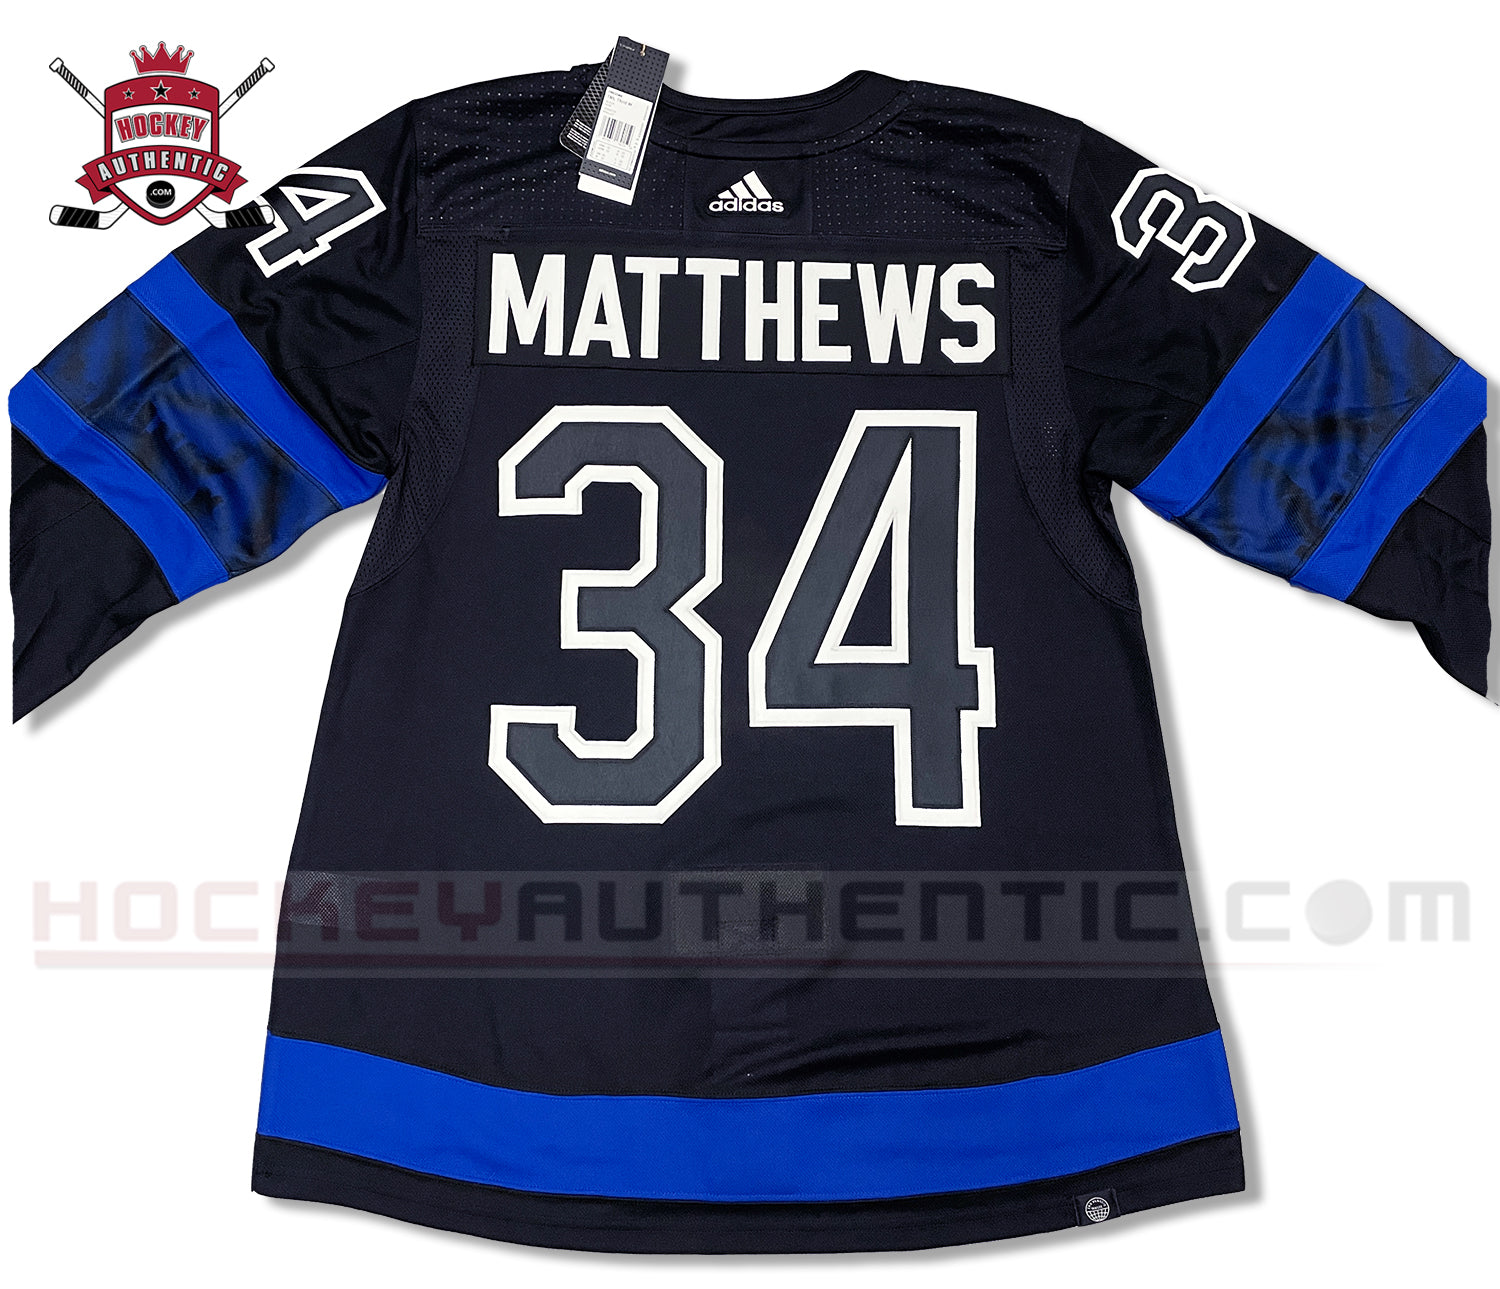 Youth Toronto Maple Leafs #34 Auston Matthews Black X Drew House Inside Out  Stitched Jersey on sale,for Cheap,wholesale from China